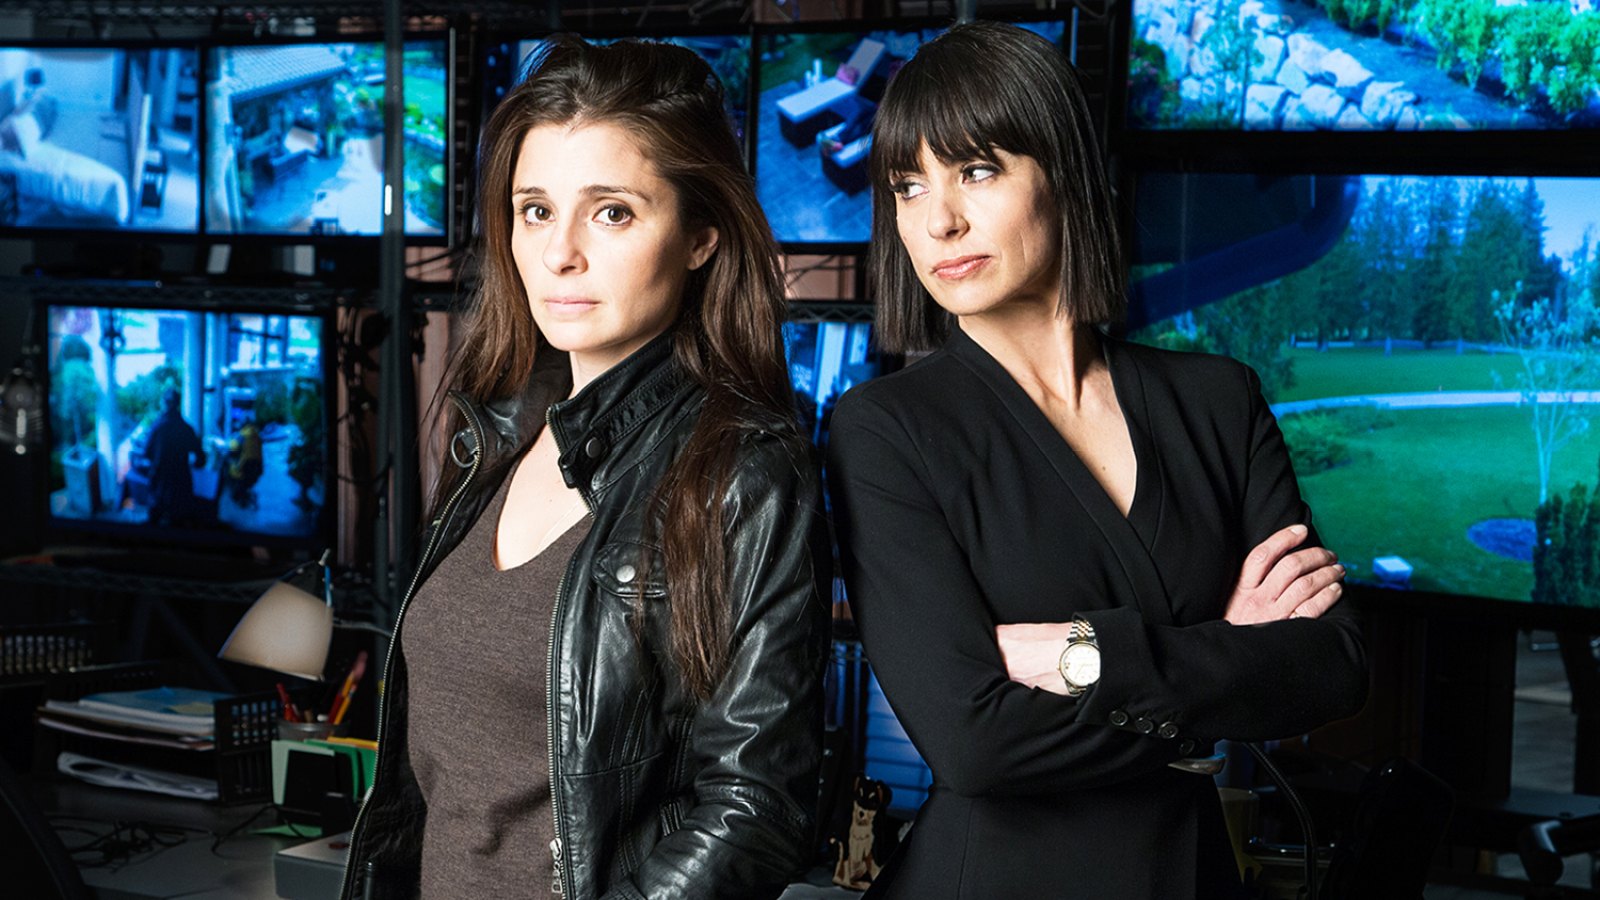 Shiri Appleby and Constance Zimmer